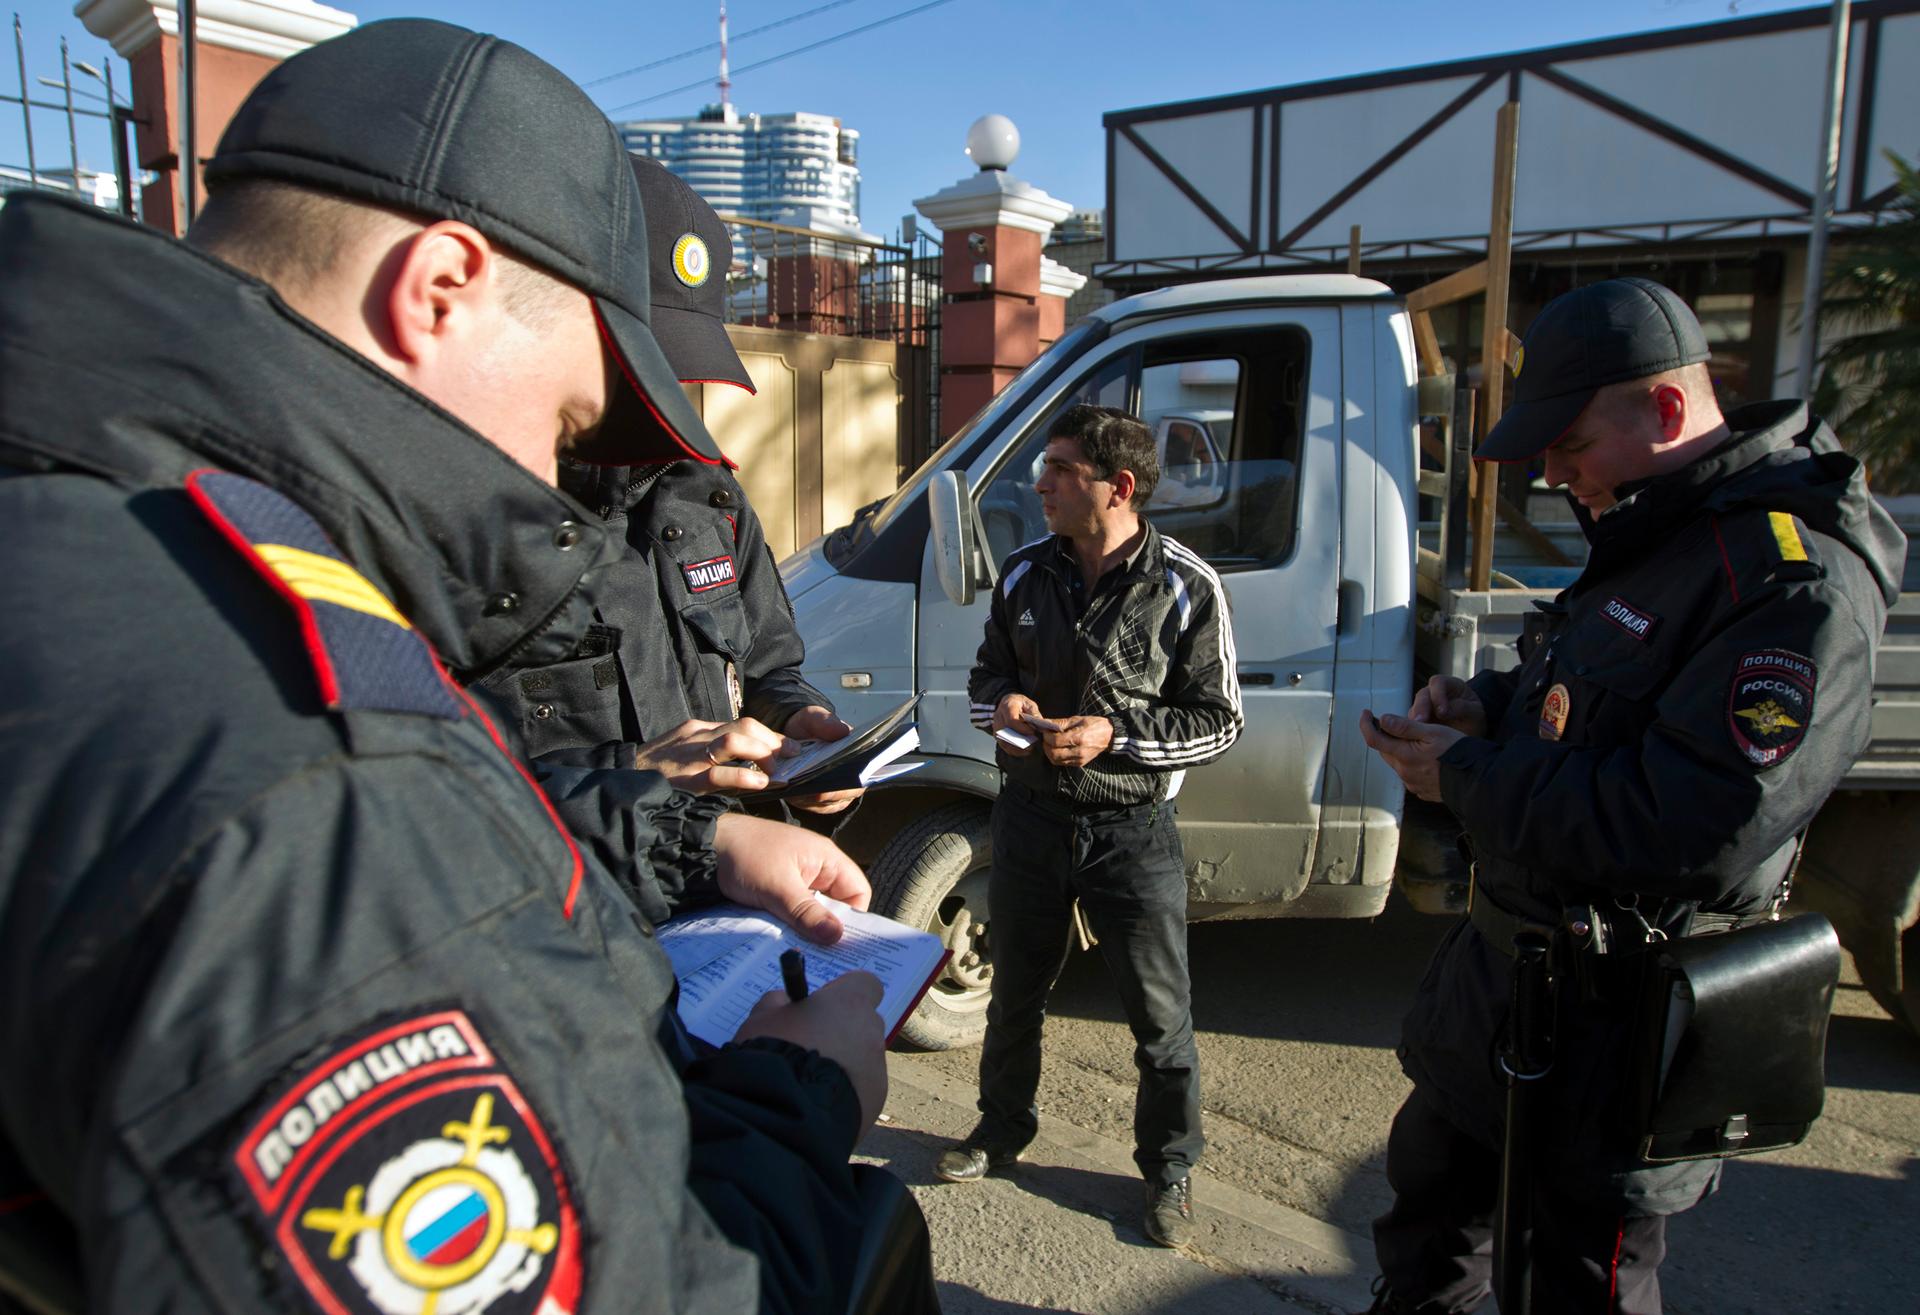 Russian police check a driver's documents in Sochi December 30, 2013. The International Olympic Committee has no doubt Russian authorities will be able to provide security at the Winter Olympics, a spokeswoman said on Monday after two bomb blasts killed t